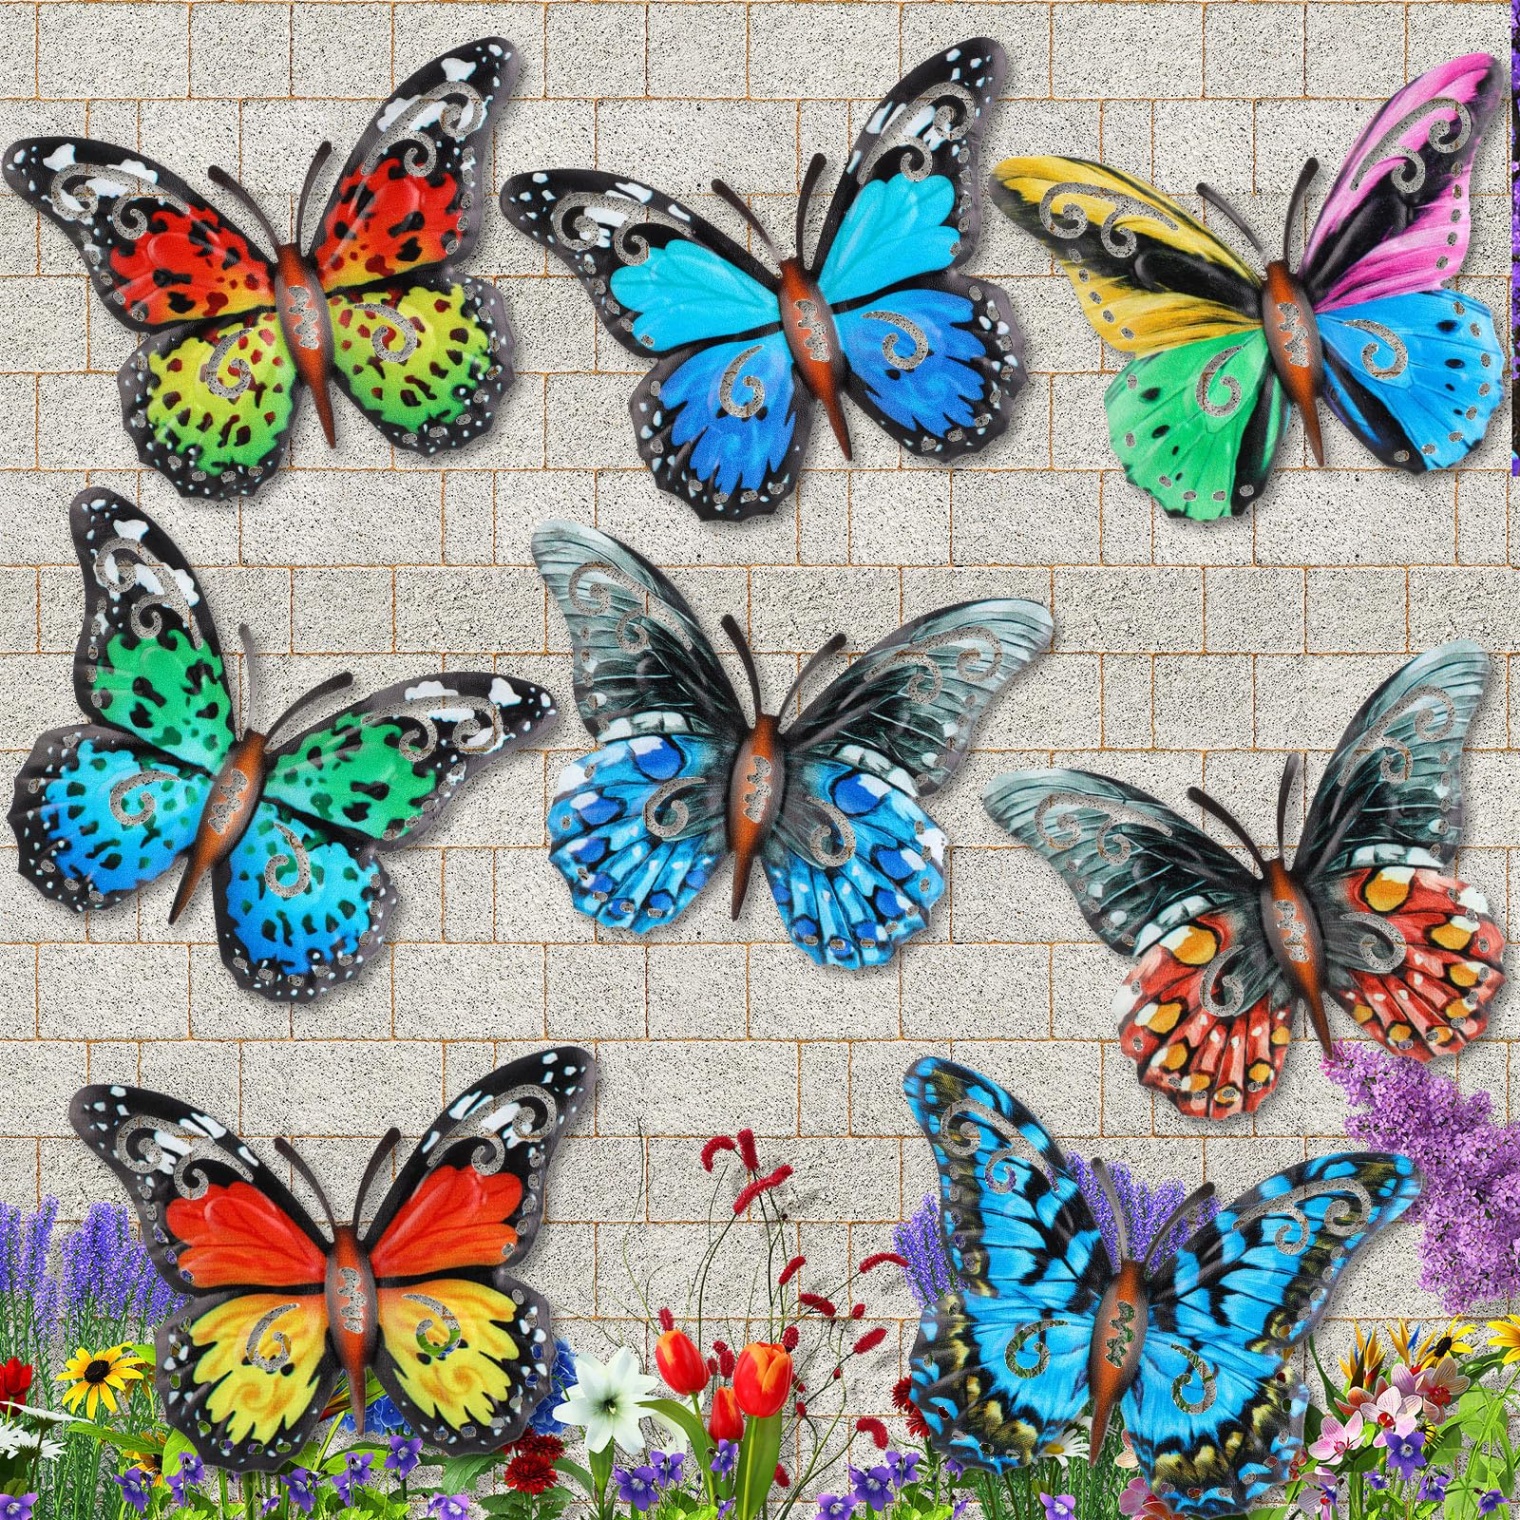 butterfly for wall decoration Niche Utama Home  Pieces Metal Butterfly Wall Art Decor, D Butterfly Hanging Wall Decor  Sculpture for Balcony Patio Living Room Garden Outdoor Fence Decoration